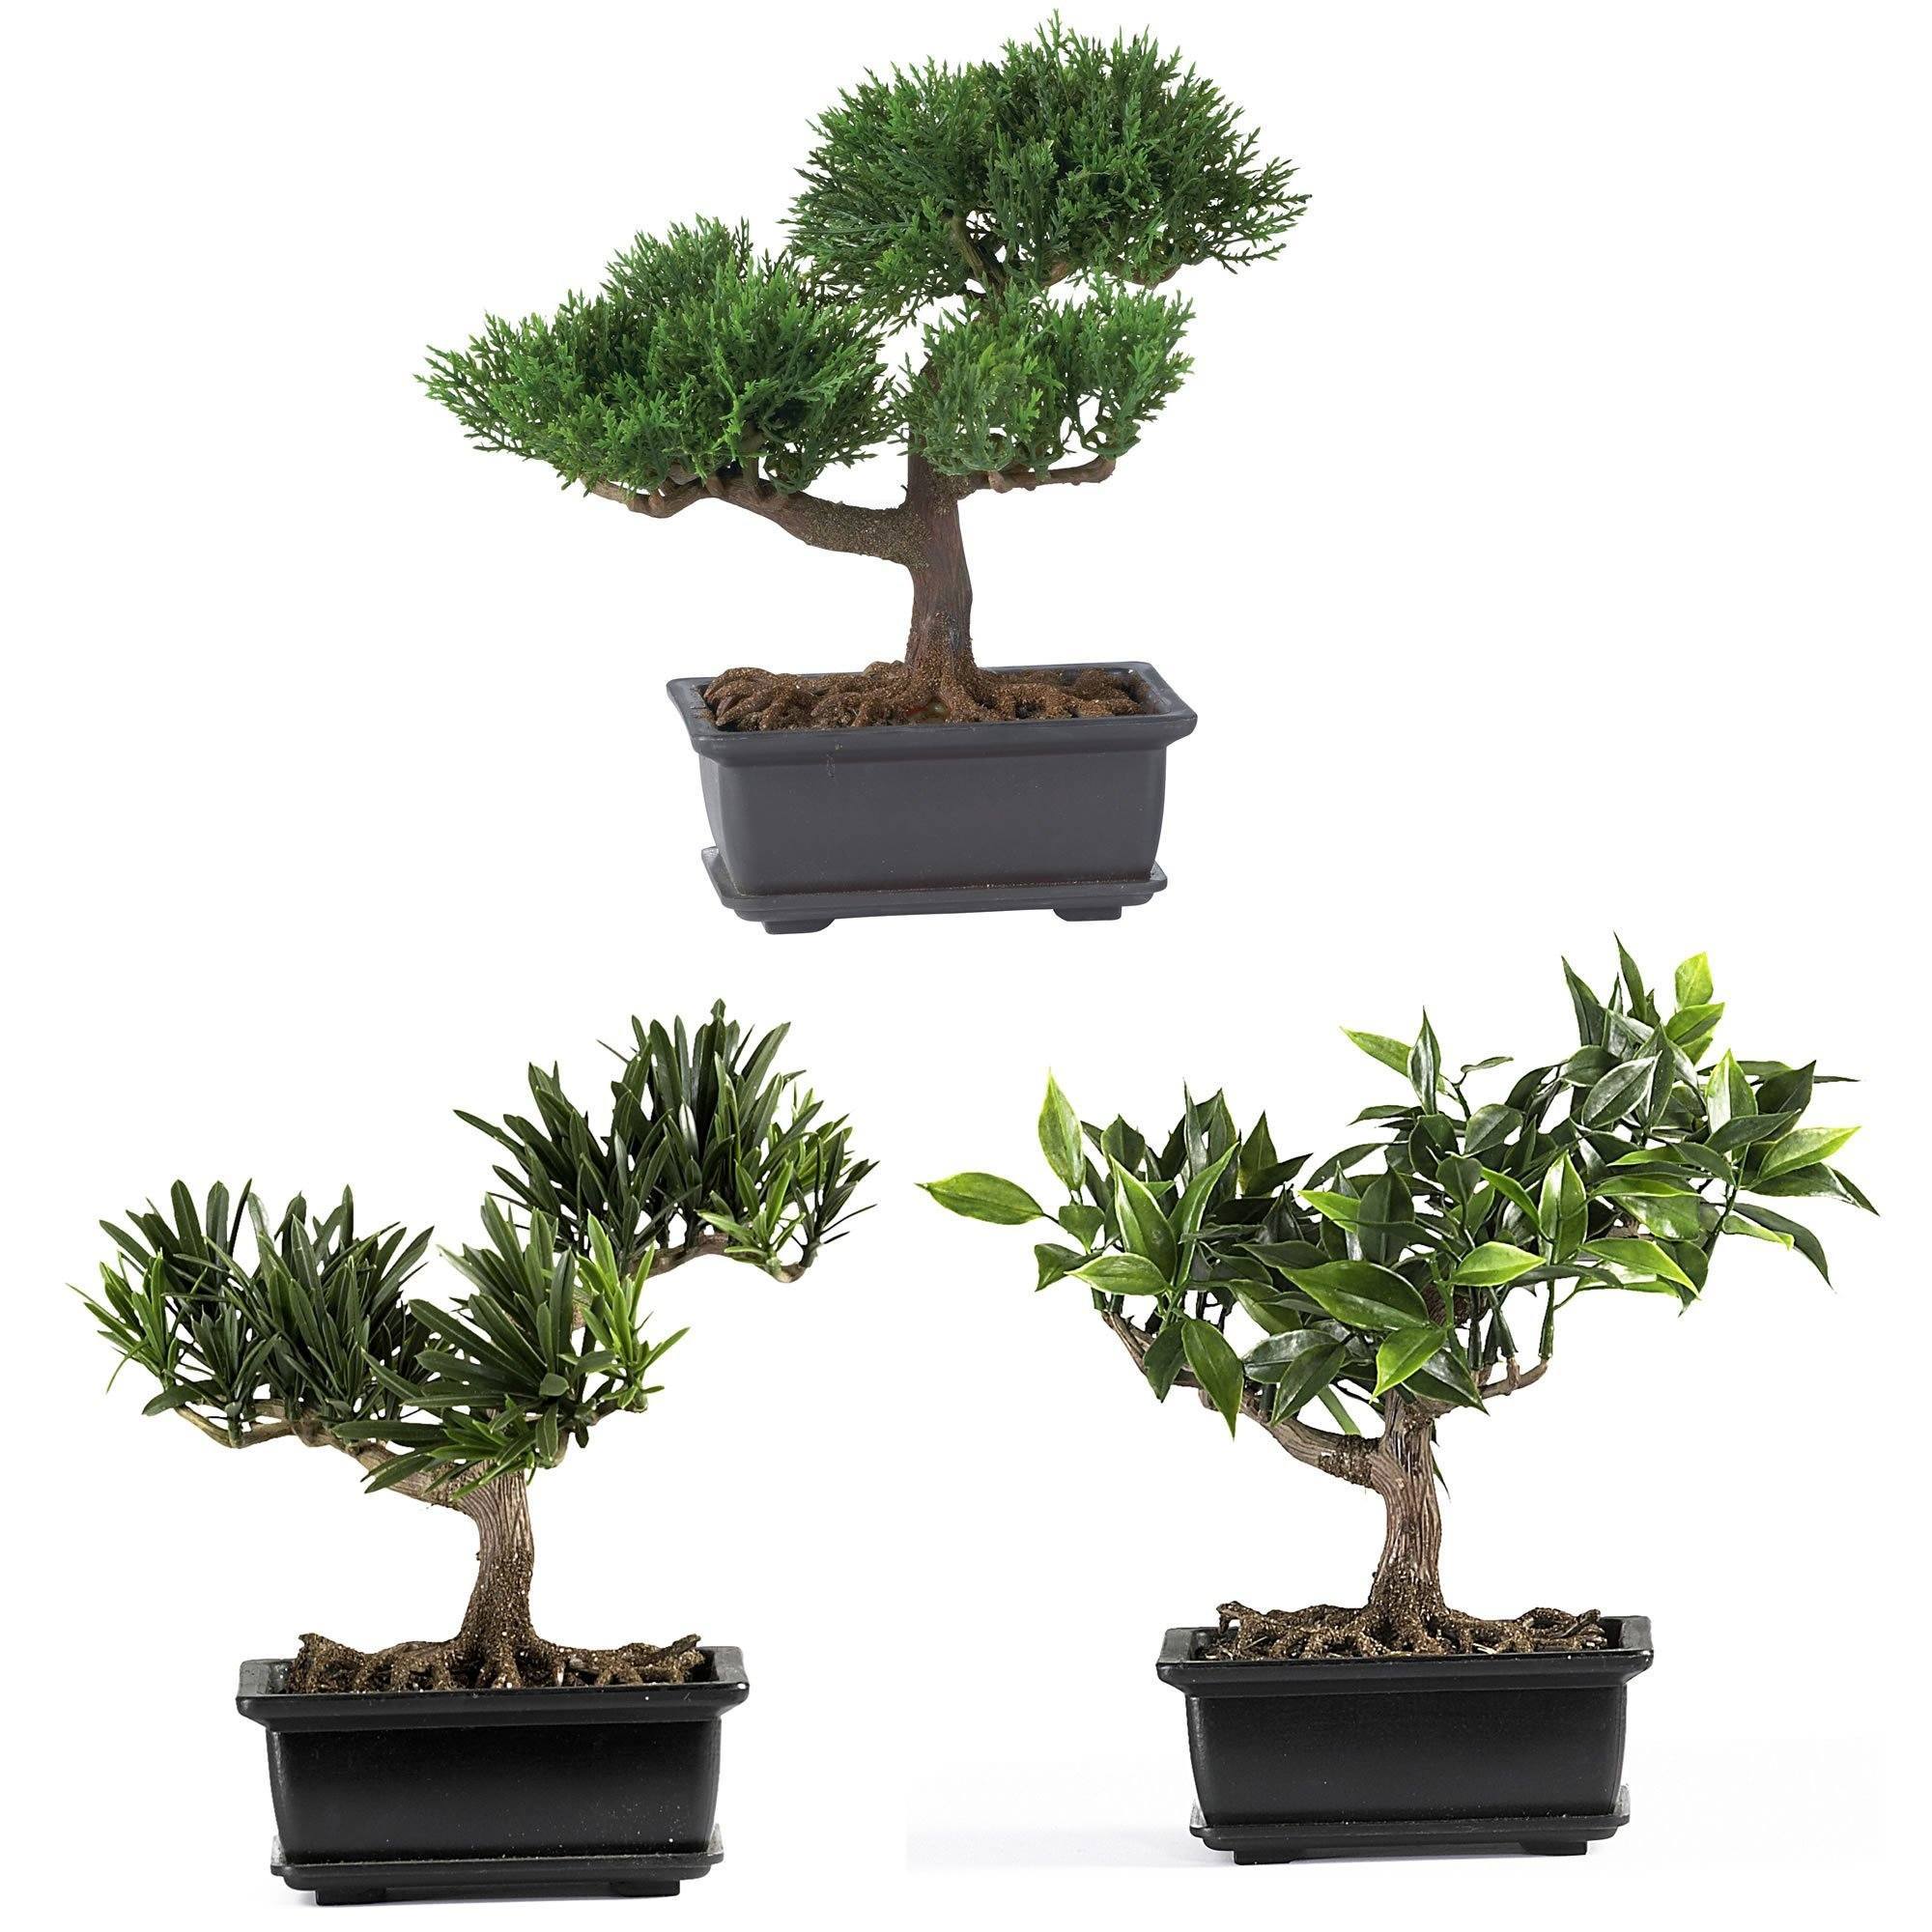 A Japanese Bonsai tree that looks like a forest ($16,000) : r